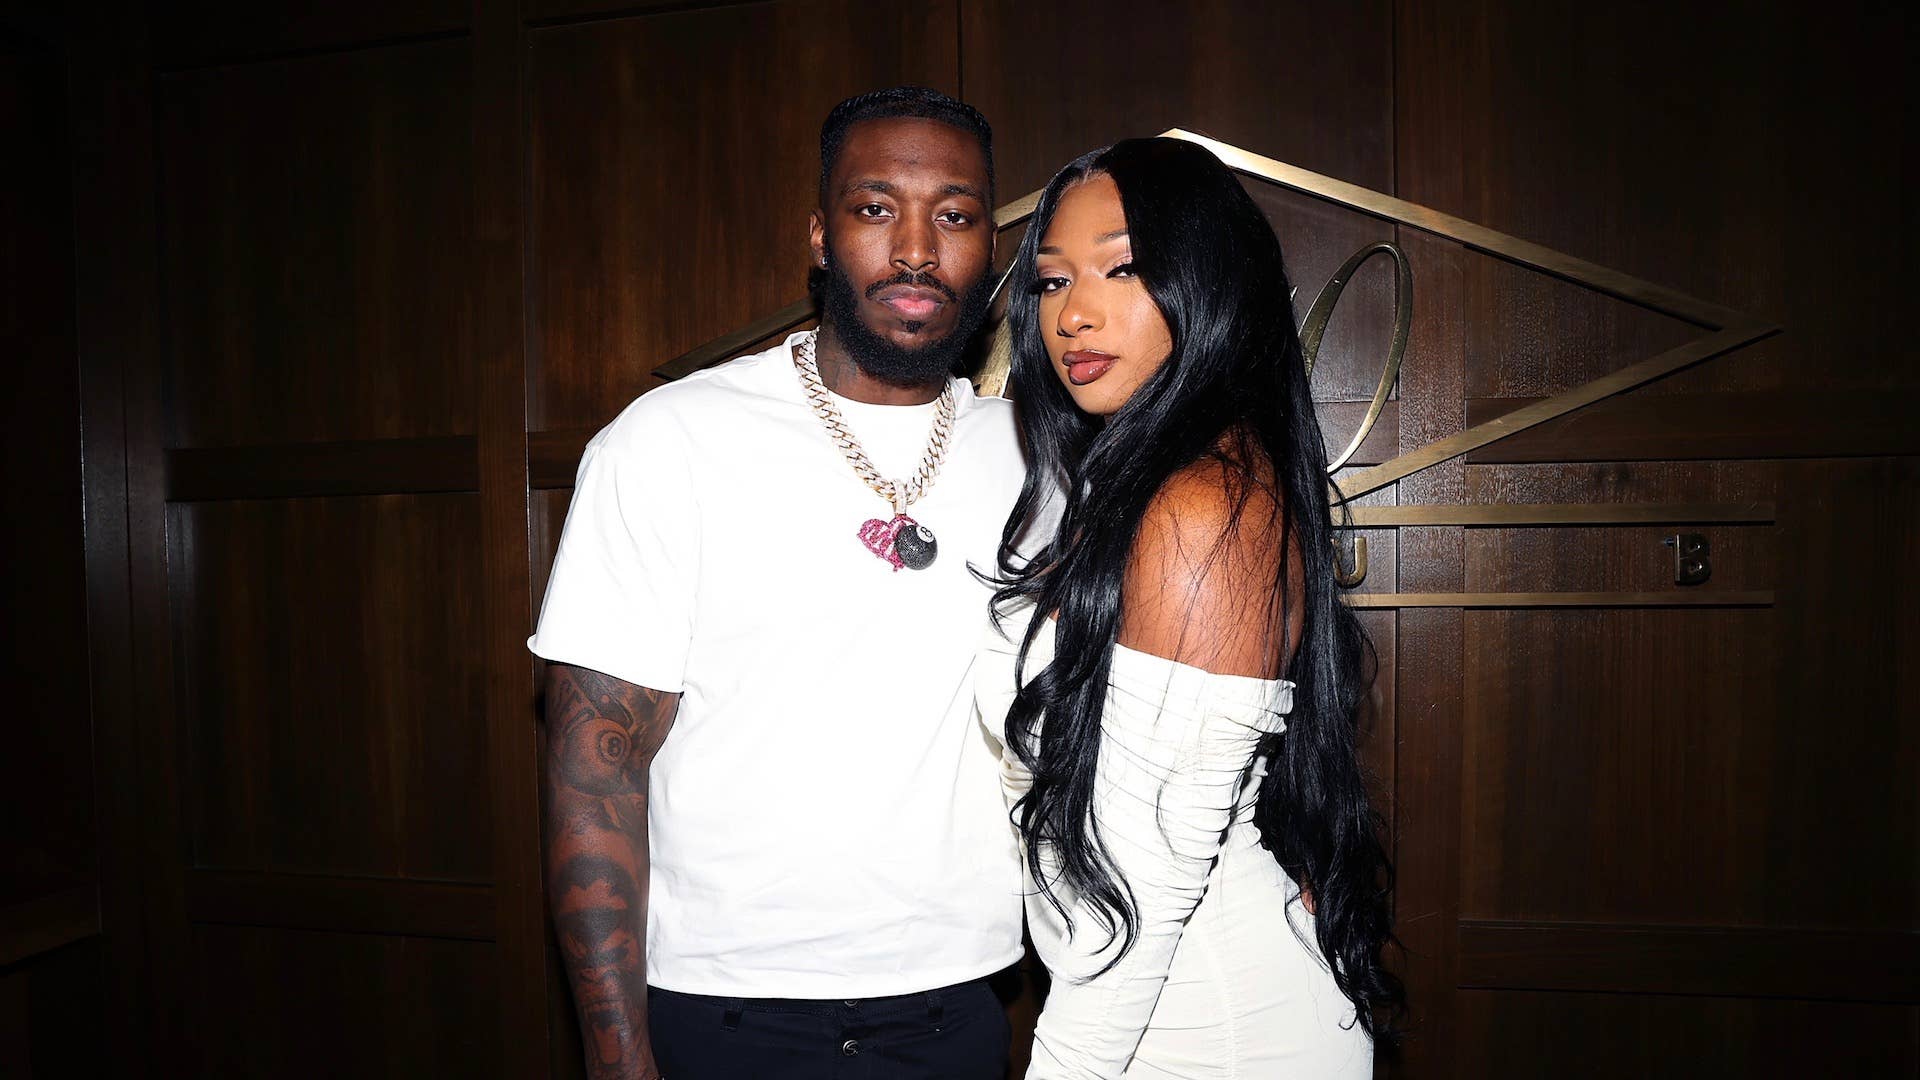 Pardison "Pardi" Fontaine and Megan Thee Stallion at 40/40 Club